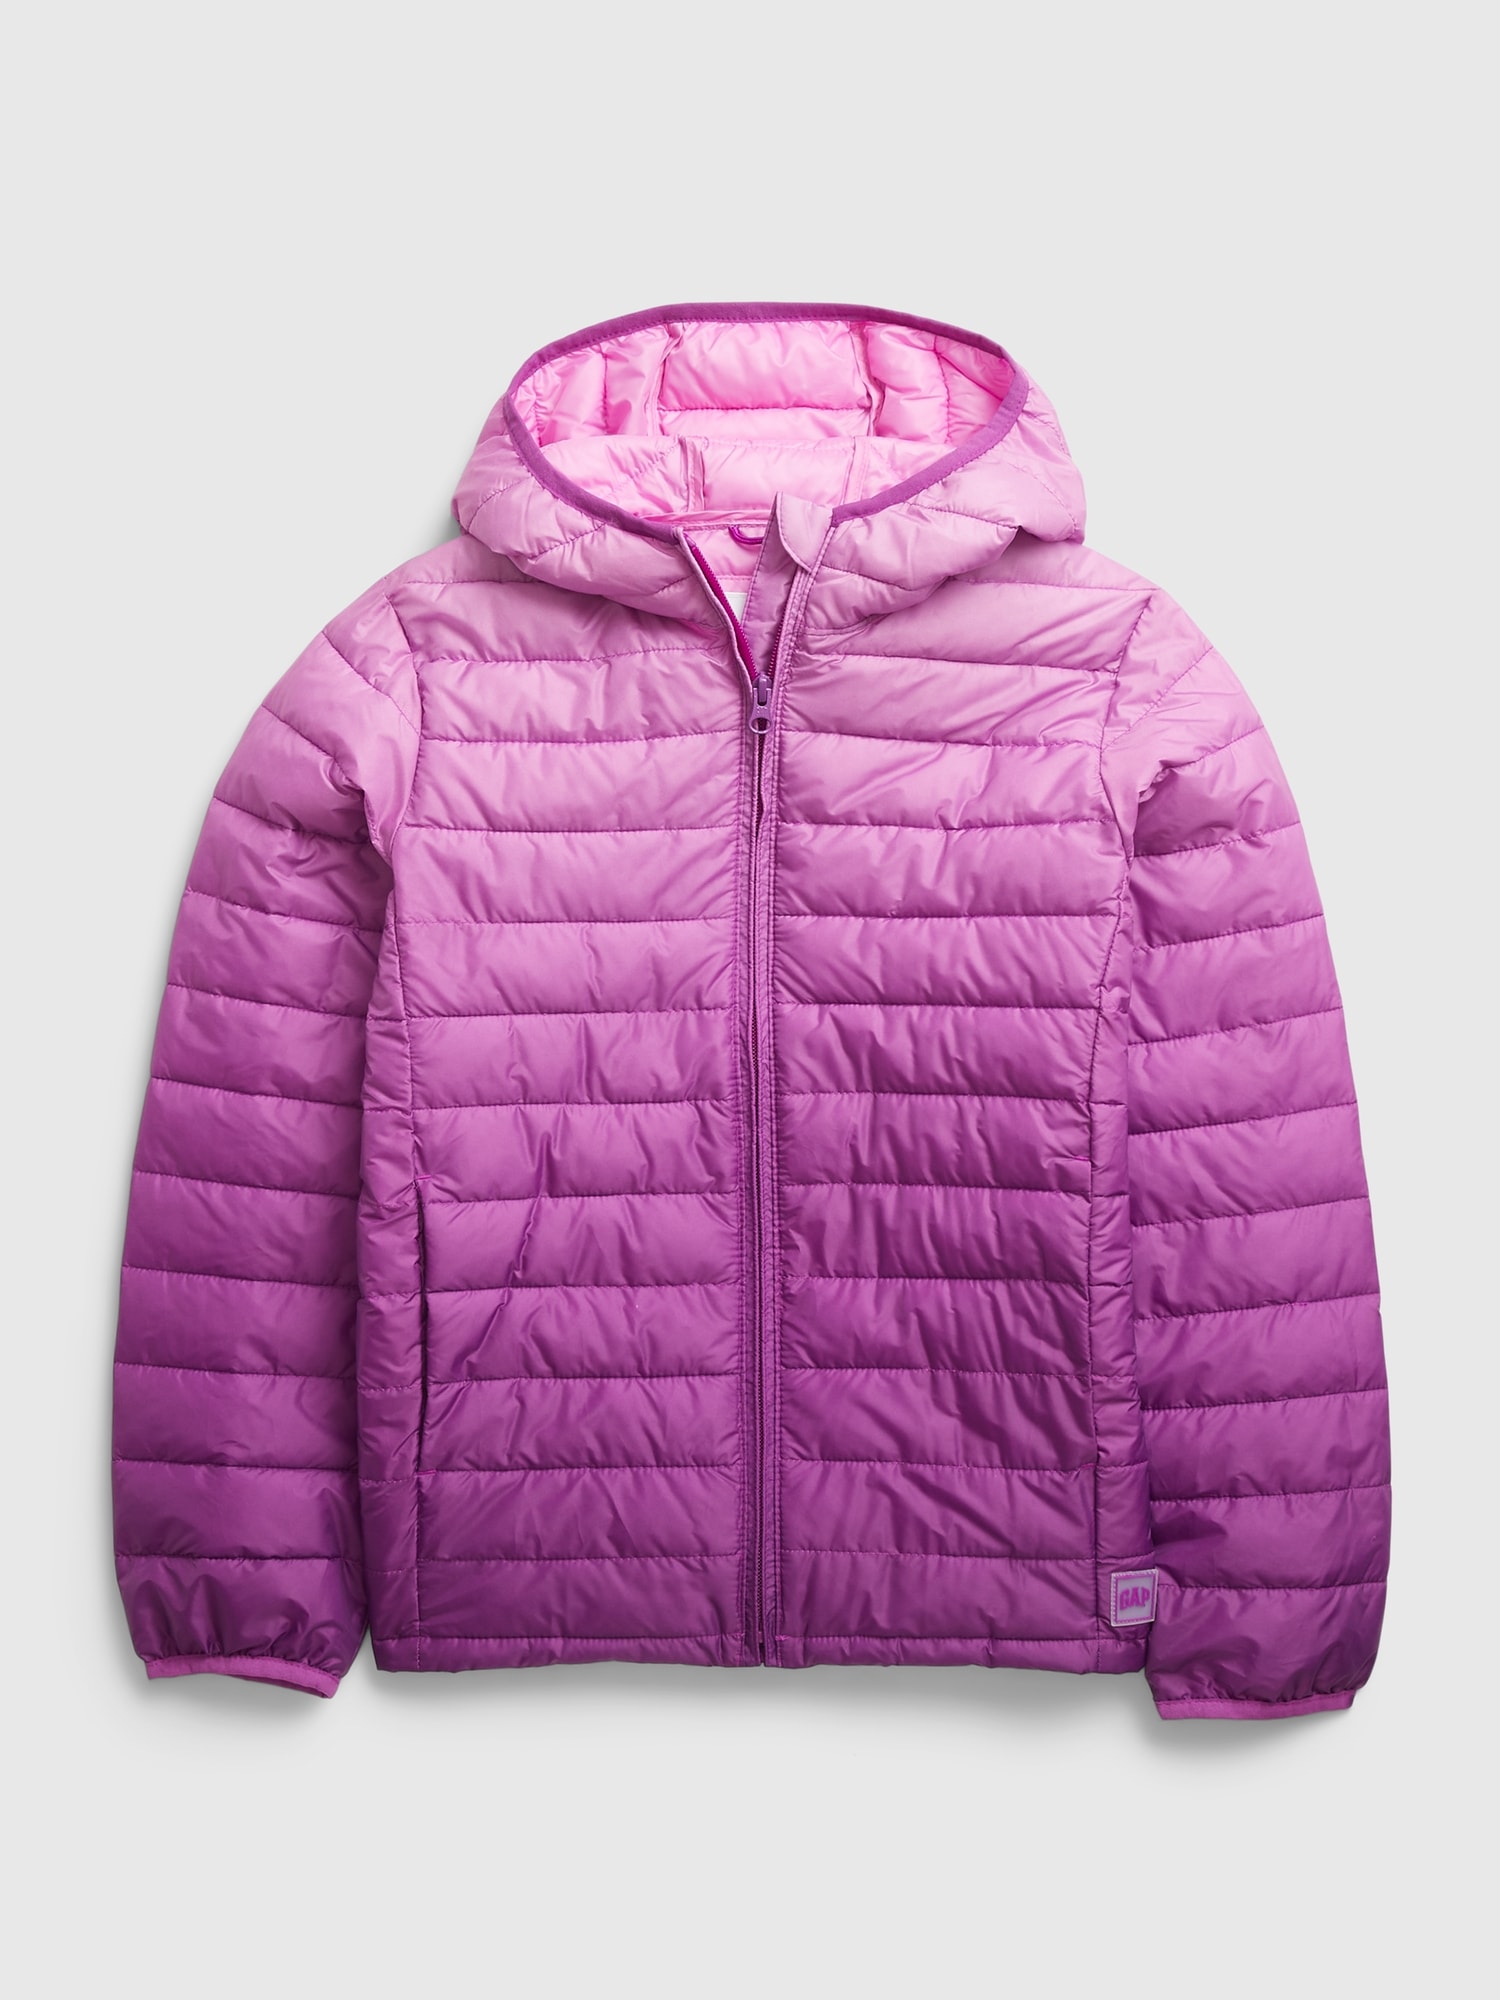 Kids 100% Recycled Polyester ColdControl Puffer Jacket | Gap